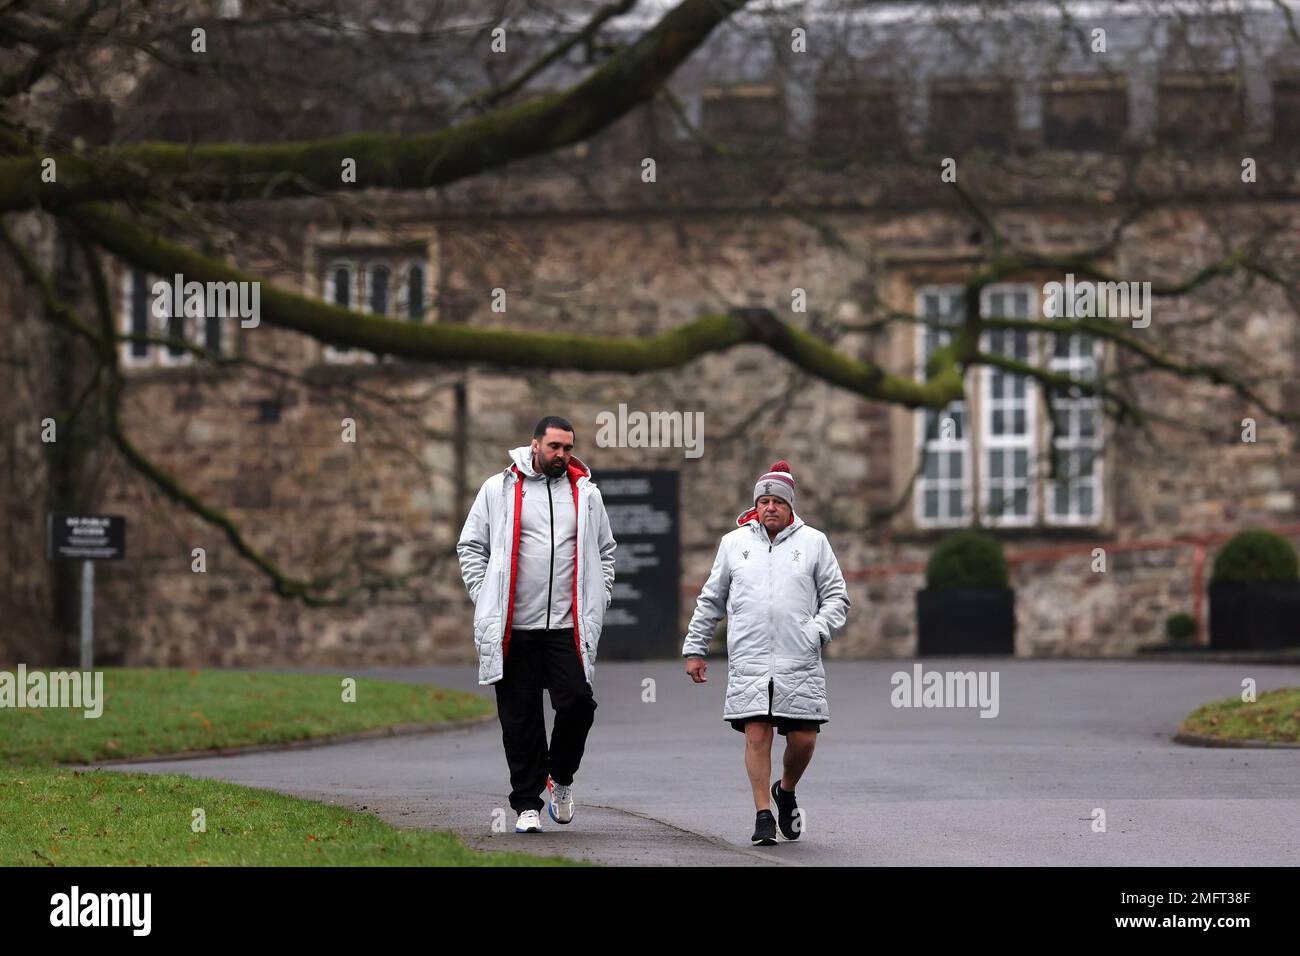 Cardiff, UK. 25th Jan, 2023. Warren Gatland, the head coach of Wales rugby team (r) arrives with Wales coach Jonathan Thomas (l) at the Wales rugby training session, Vale of Glamorgan on Wednesday 25th January 2023. The team are preparing for this years Guinness Six nations championship . pic by Andrew Orchard/Andrew Orchard sports photography/ Alamy Live News Credit: Andrew Orchard sports photography/Alamy Live News Stock Photo